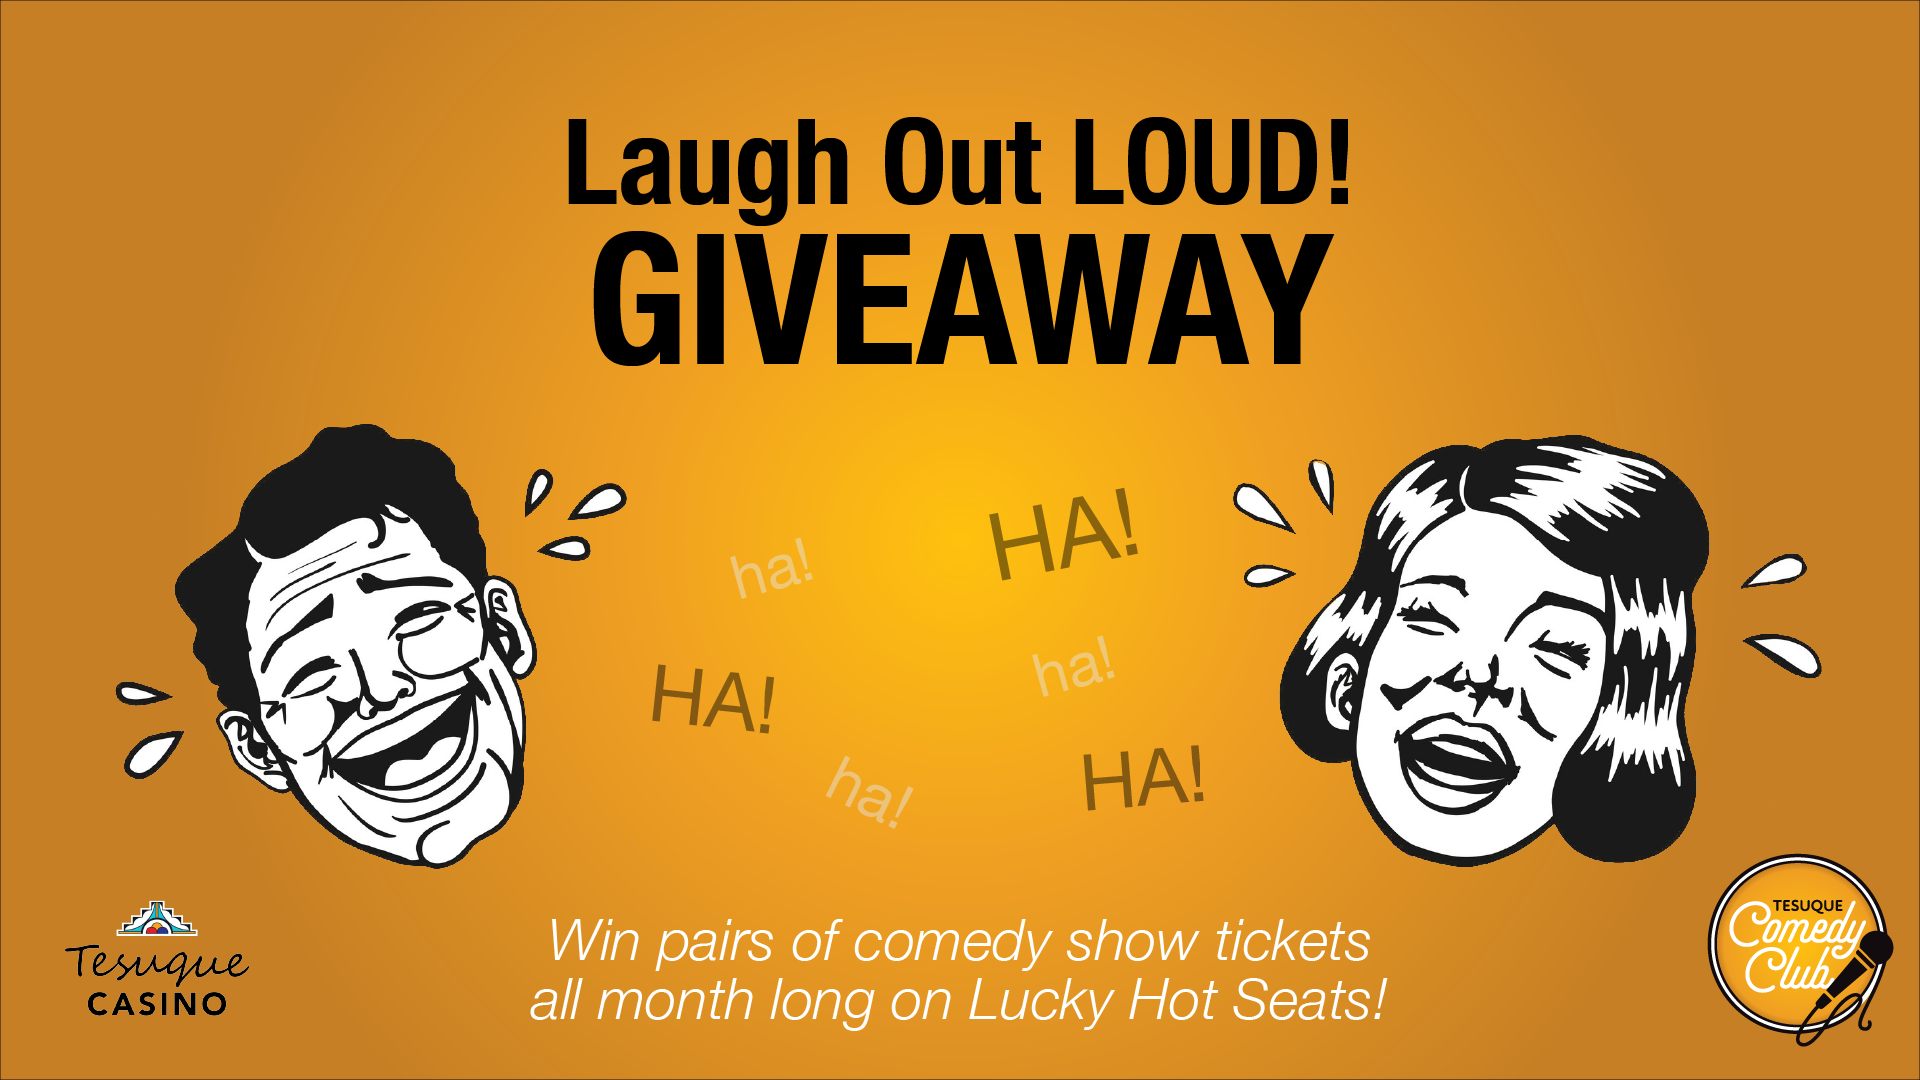 Laugh Out Loud giveaway: Win pairs of comedy show tickets all month long on Lucky Hot seats!